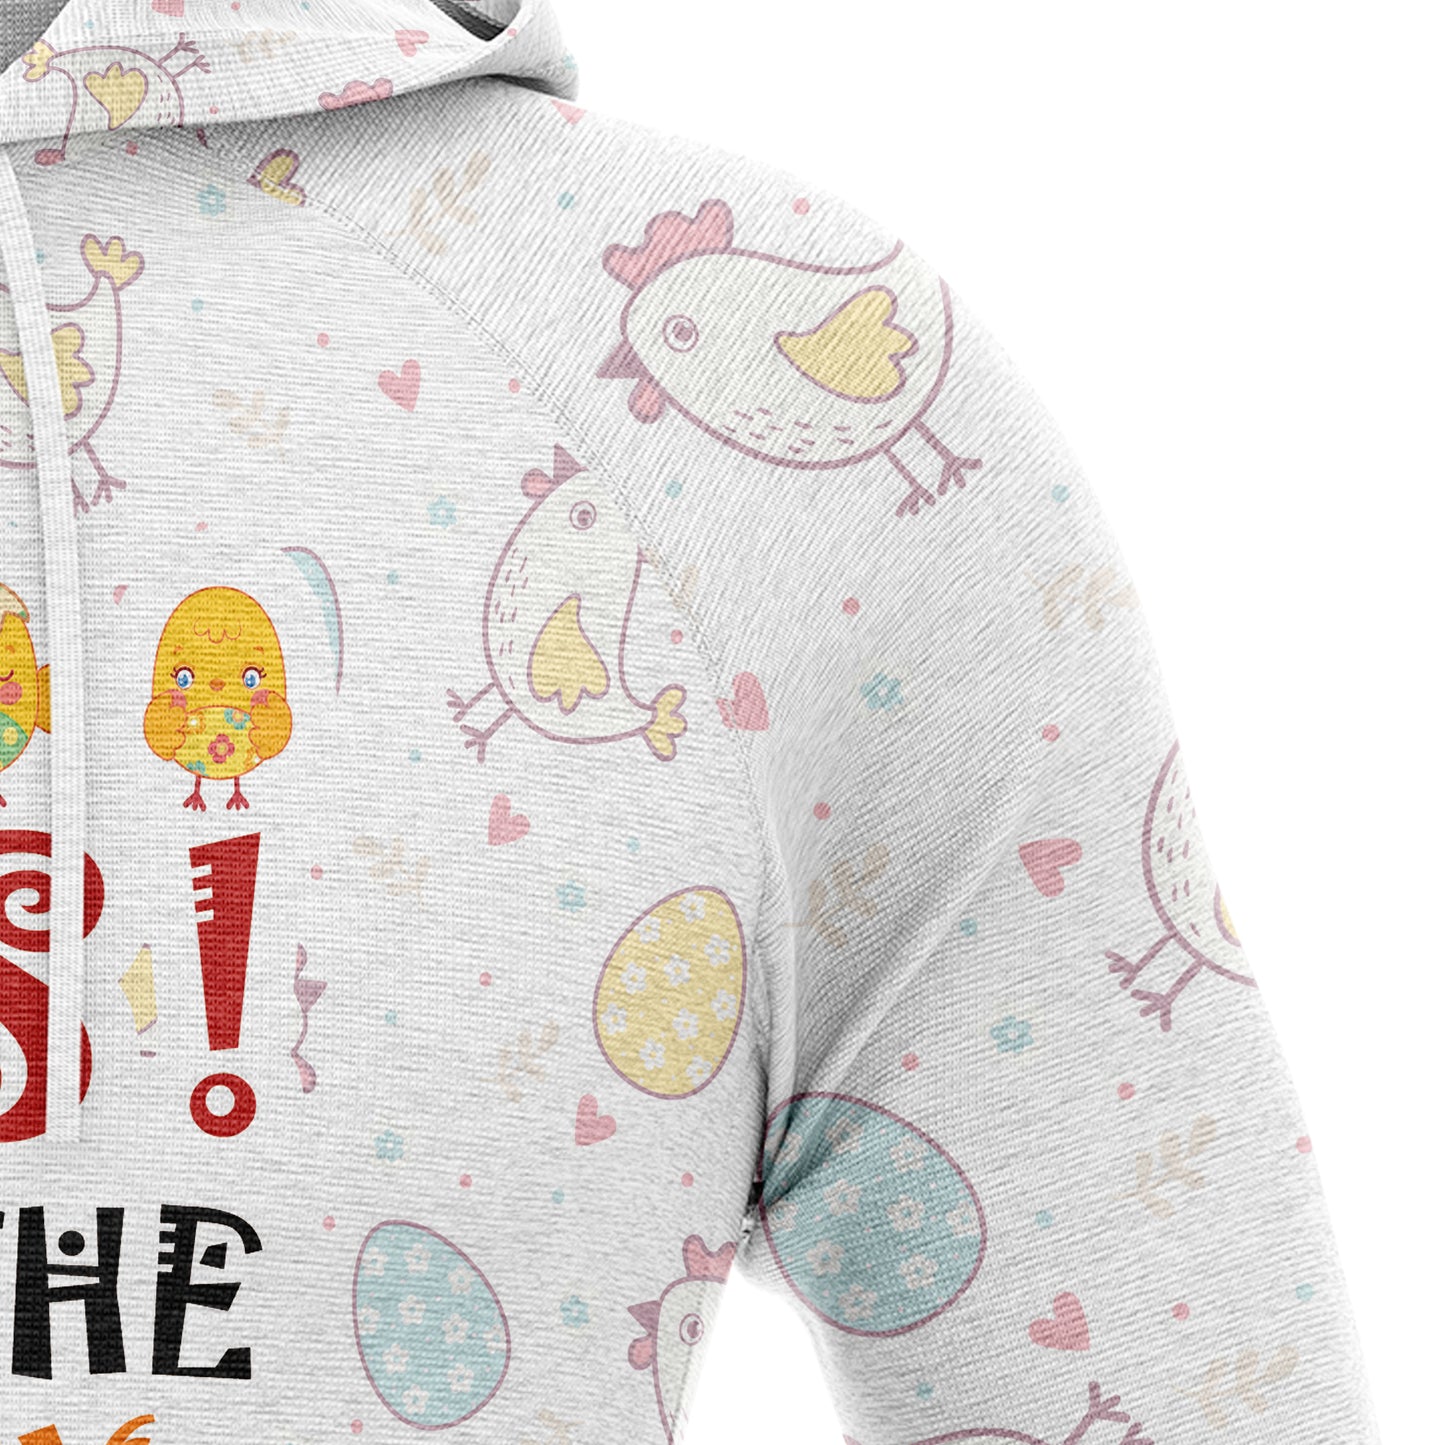 Crazy Chicken Lady TG51118 All Over Print Unisex Hoodie